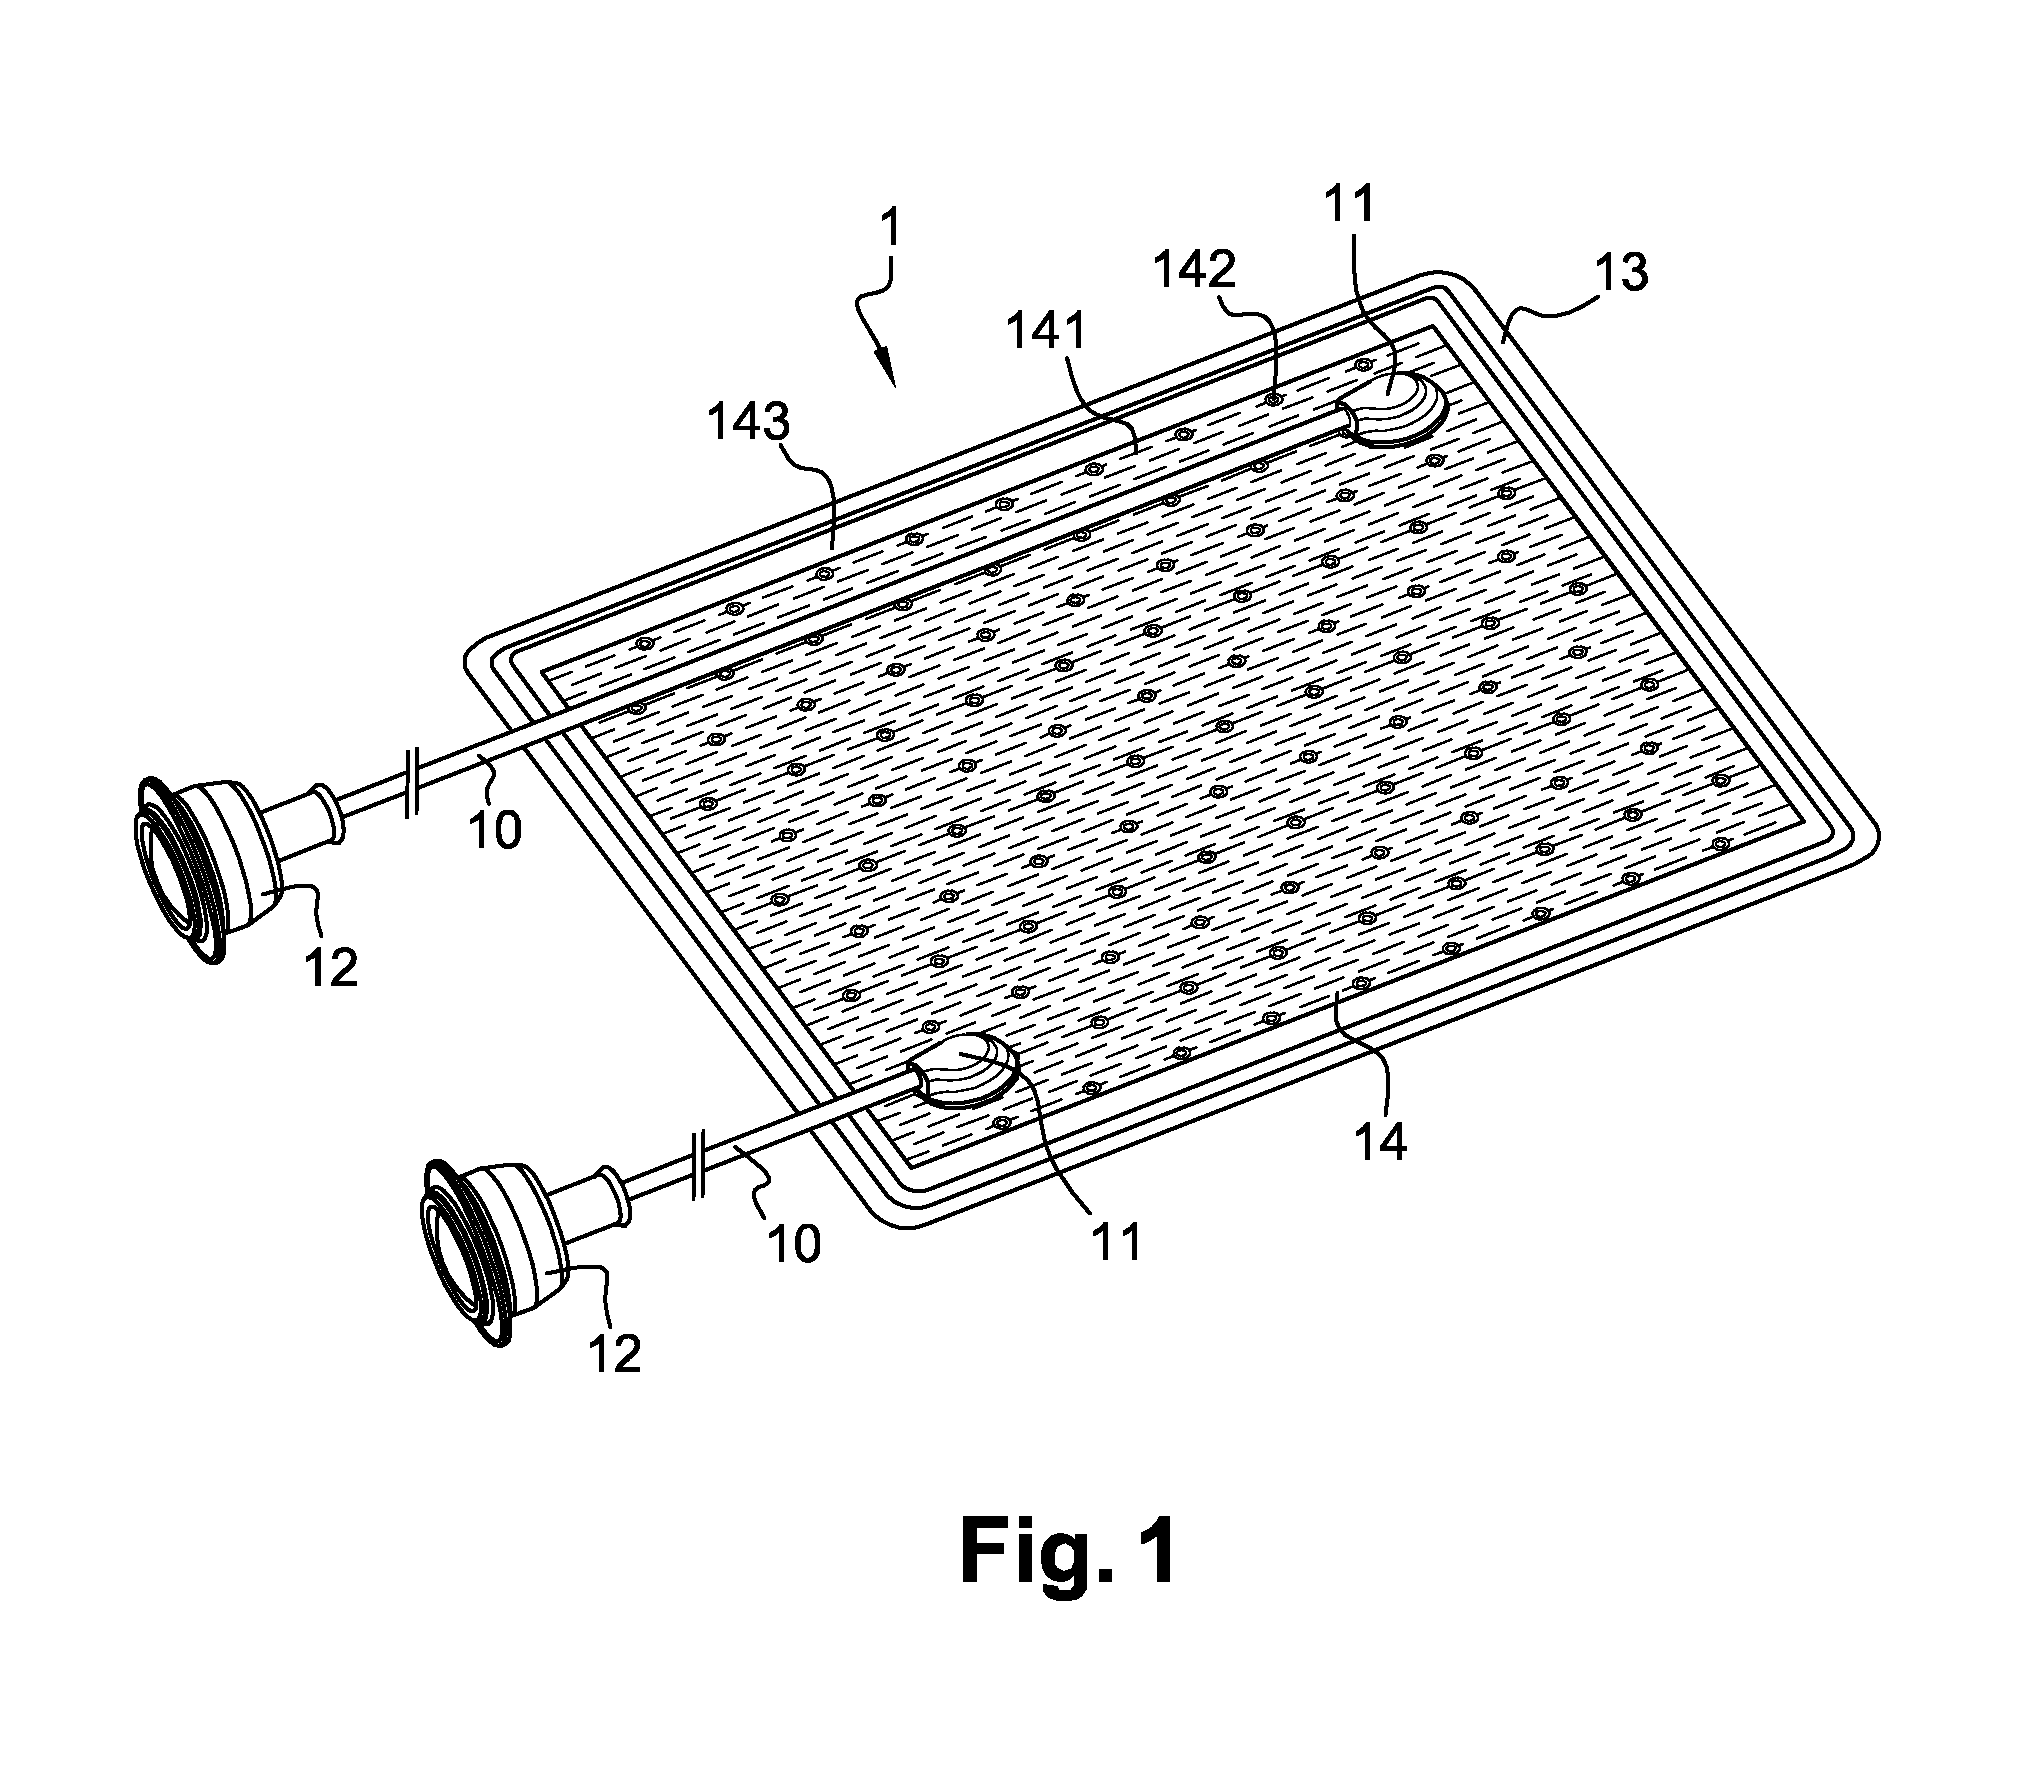 Bag for forming an implantable artificial organ